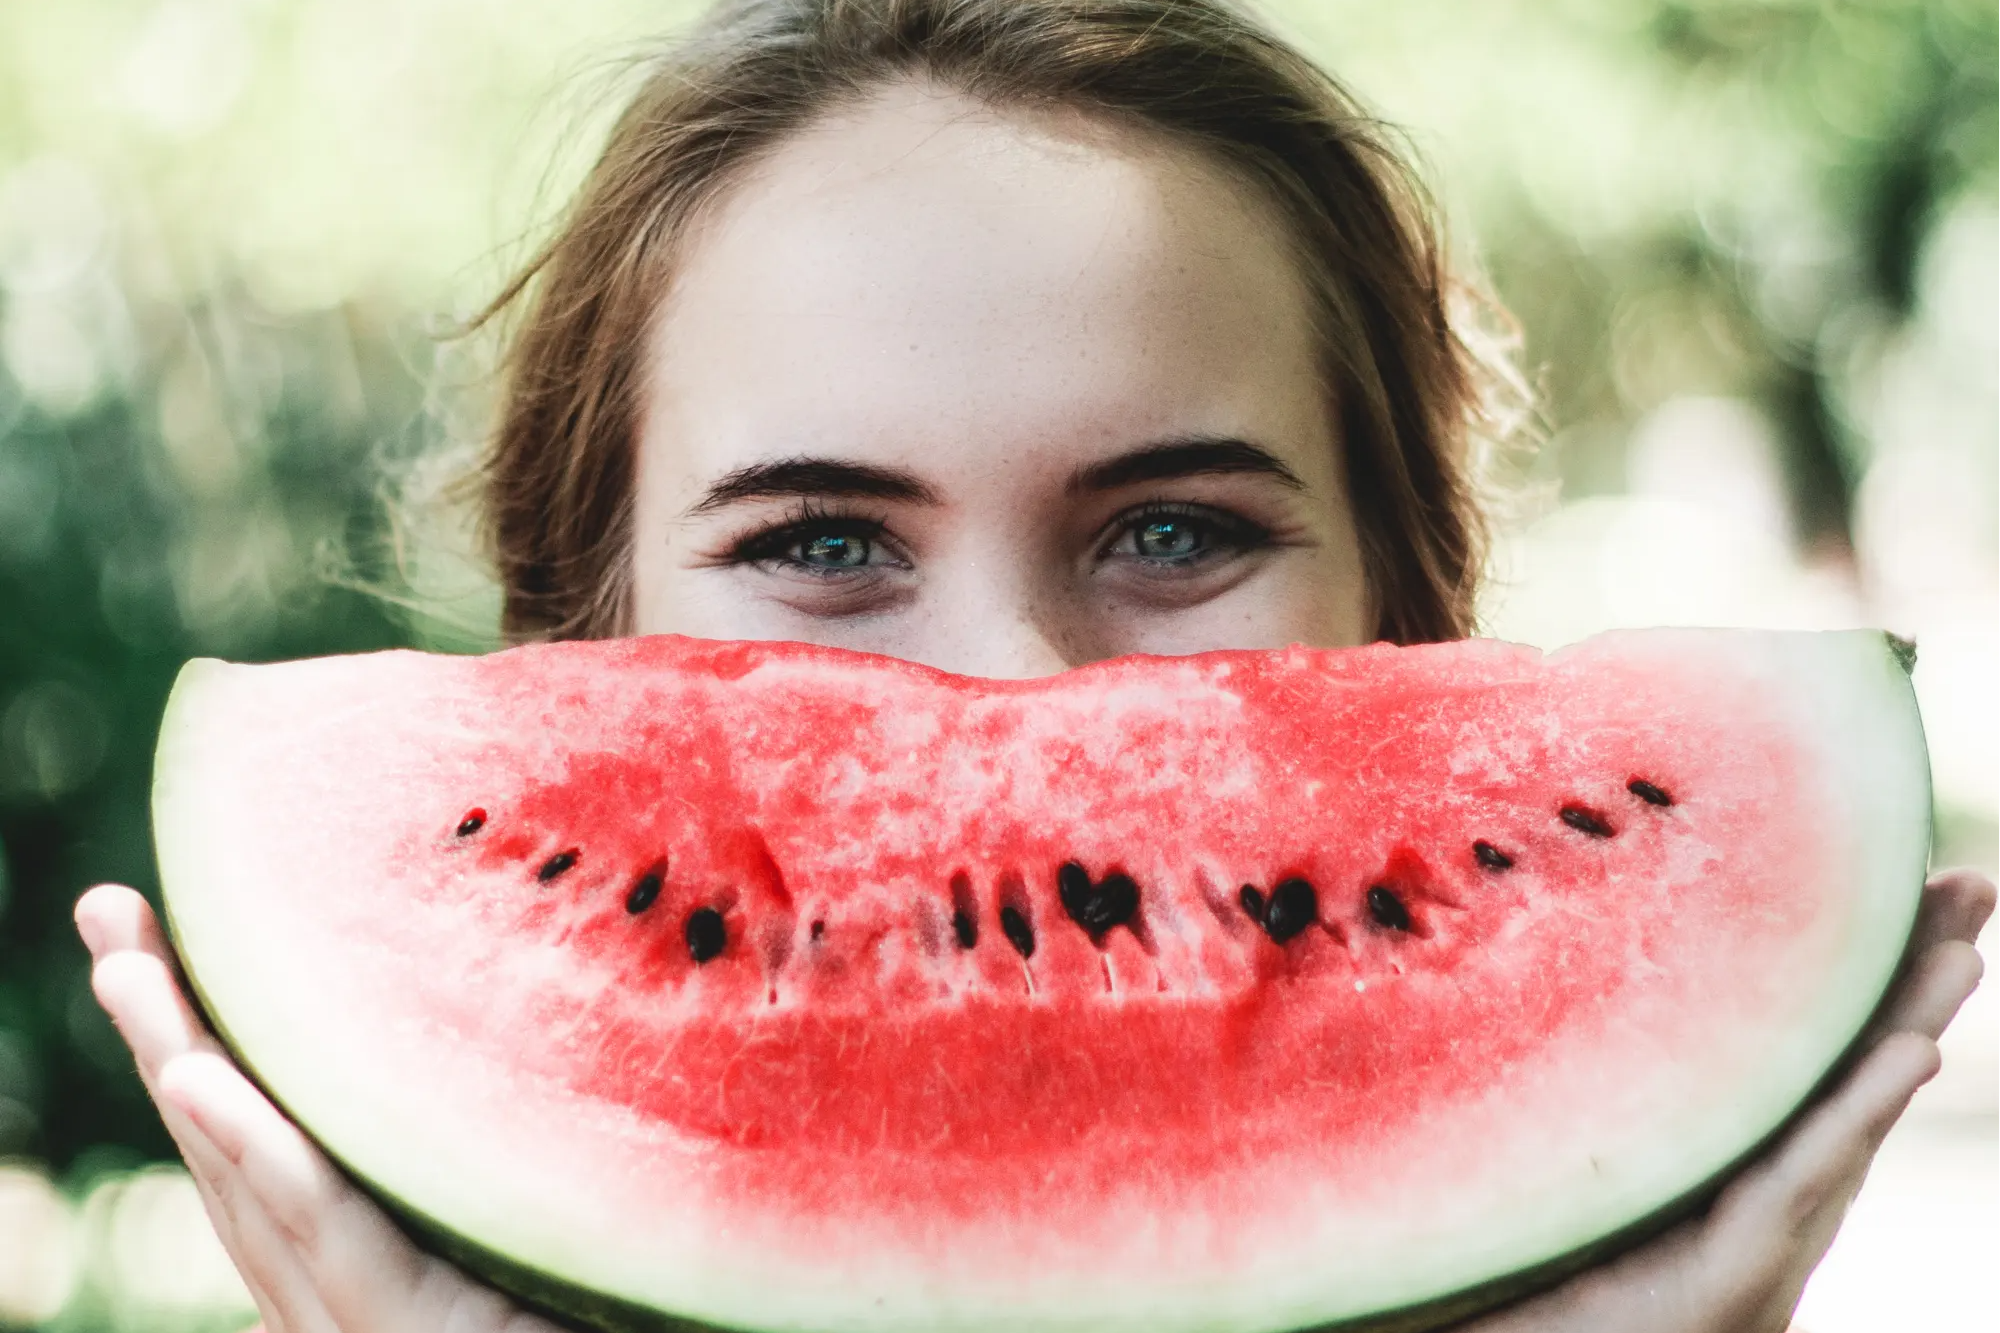 woman holding watermelon over mouth as a smile